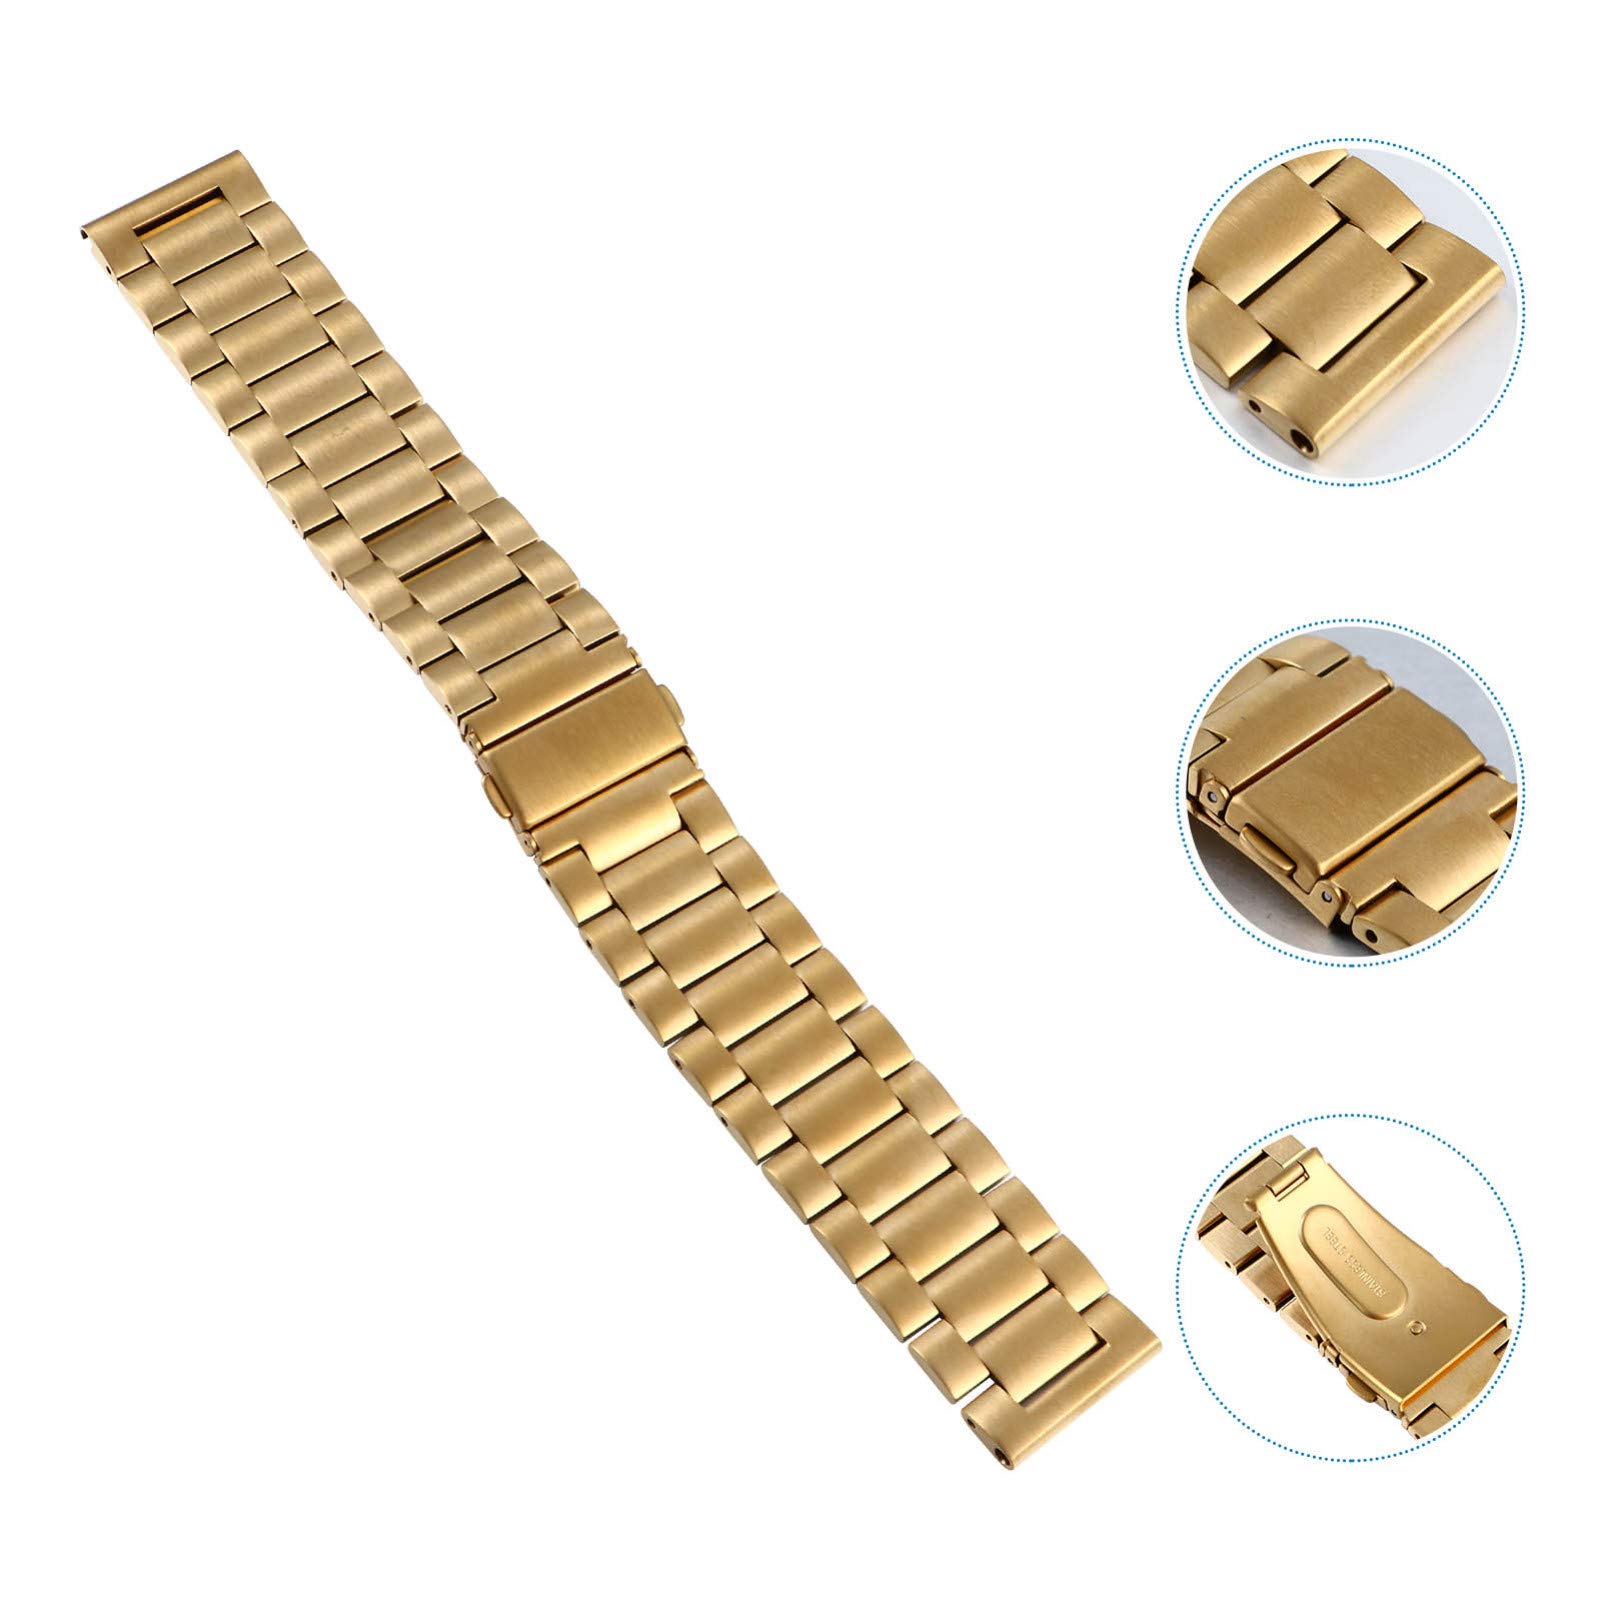 NICERIO Compatible for Fossil Gen 5 Carlyle/Julianna Watch Bands Stainless Steel Quick Release Replacement Strap Watch Band